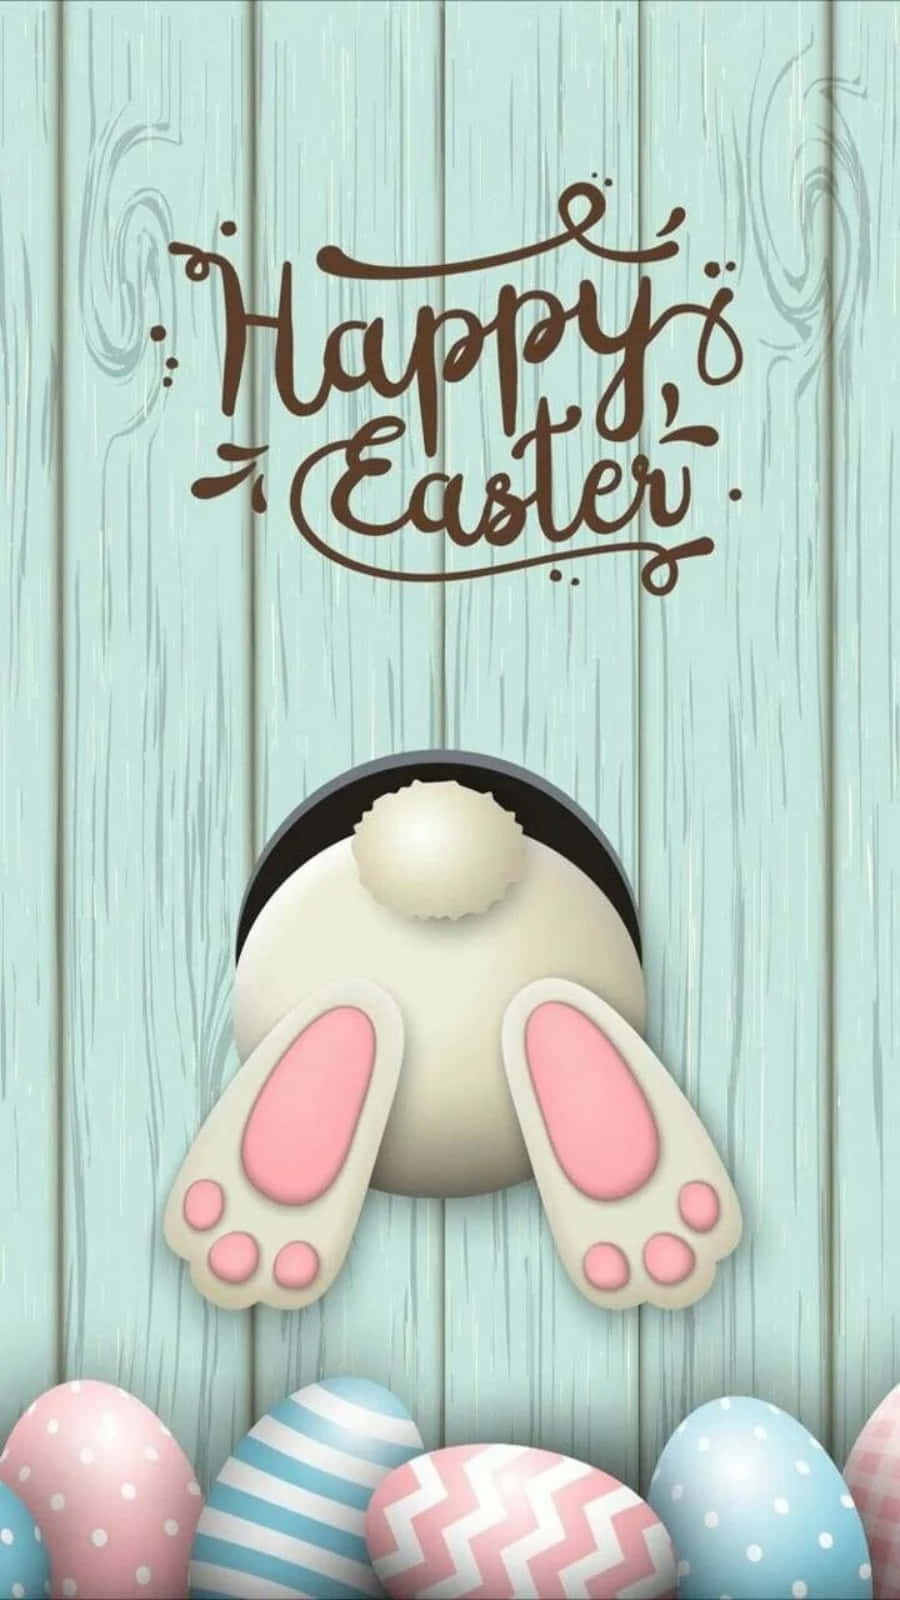 Wishing a Happy Easter to you and your loved ones!